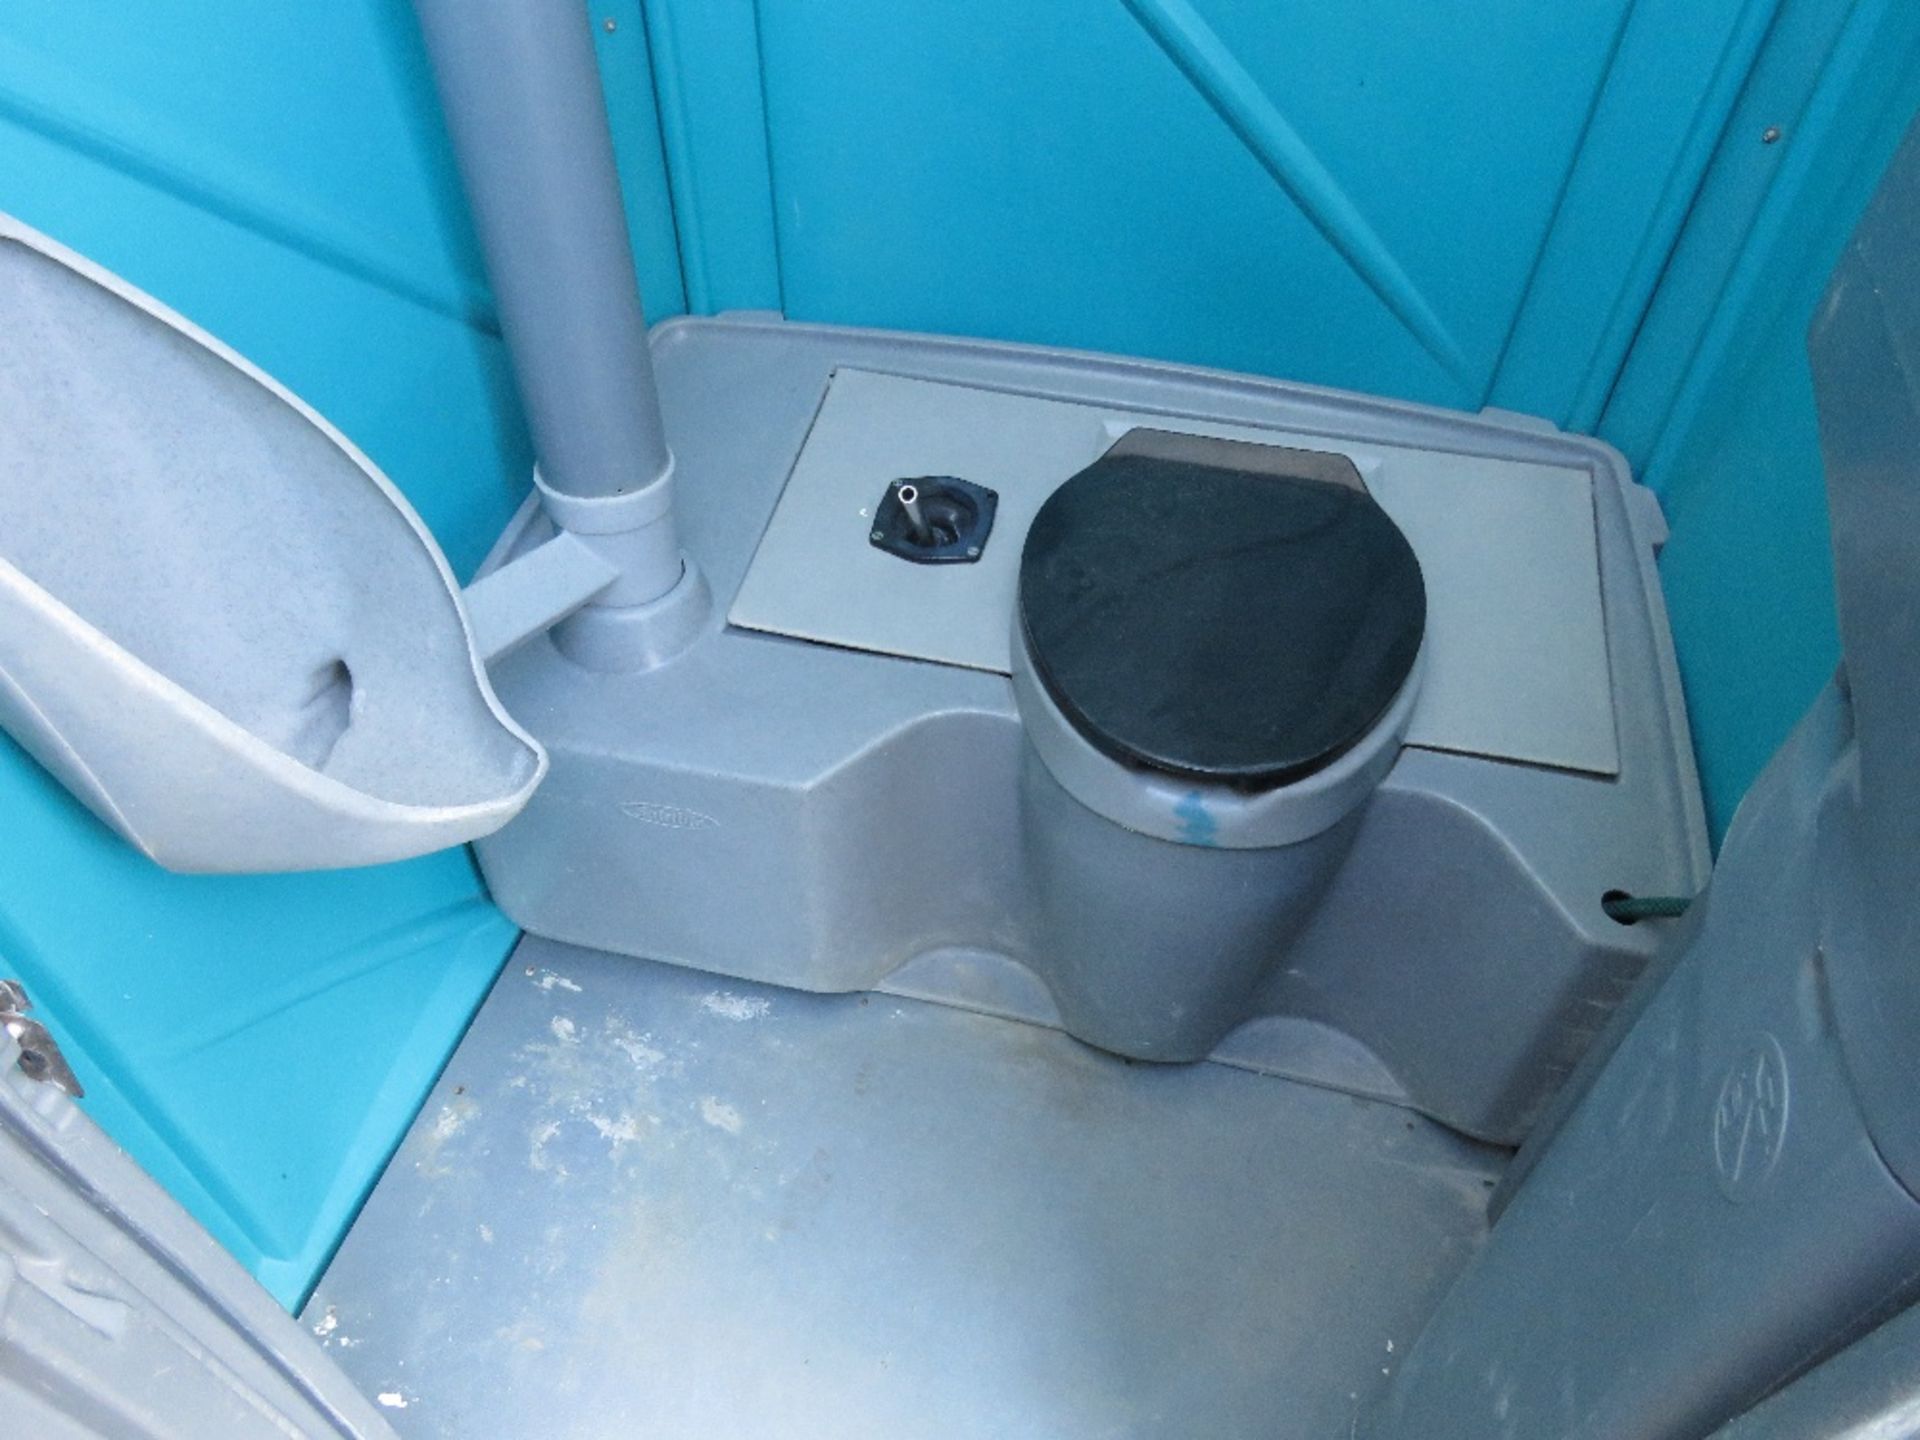 PORTABLE SITE TOILET WITH WASHBASIN AND URINAL CLEANED AND BLUE DETERGENT ADDED READY FOR USE. TH - Image 2 of 4